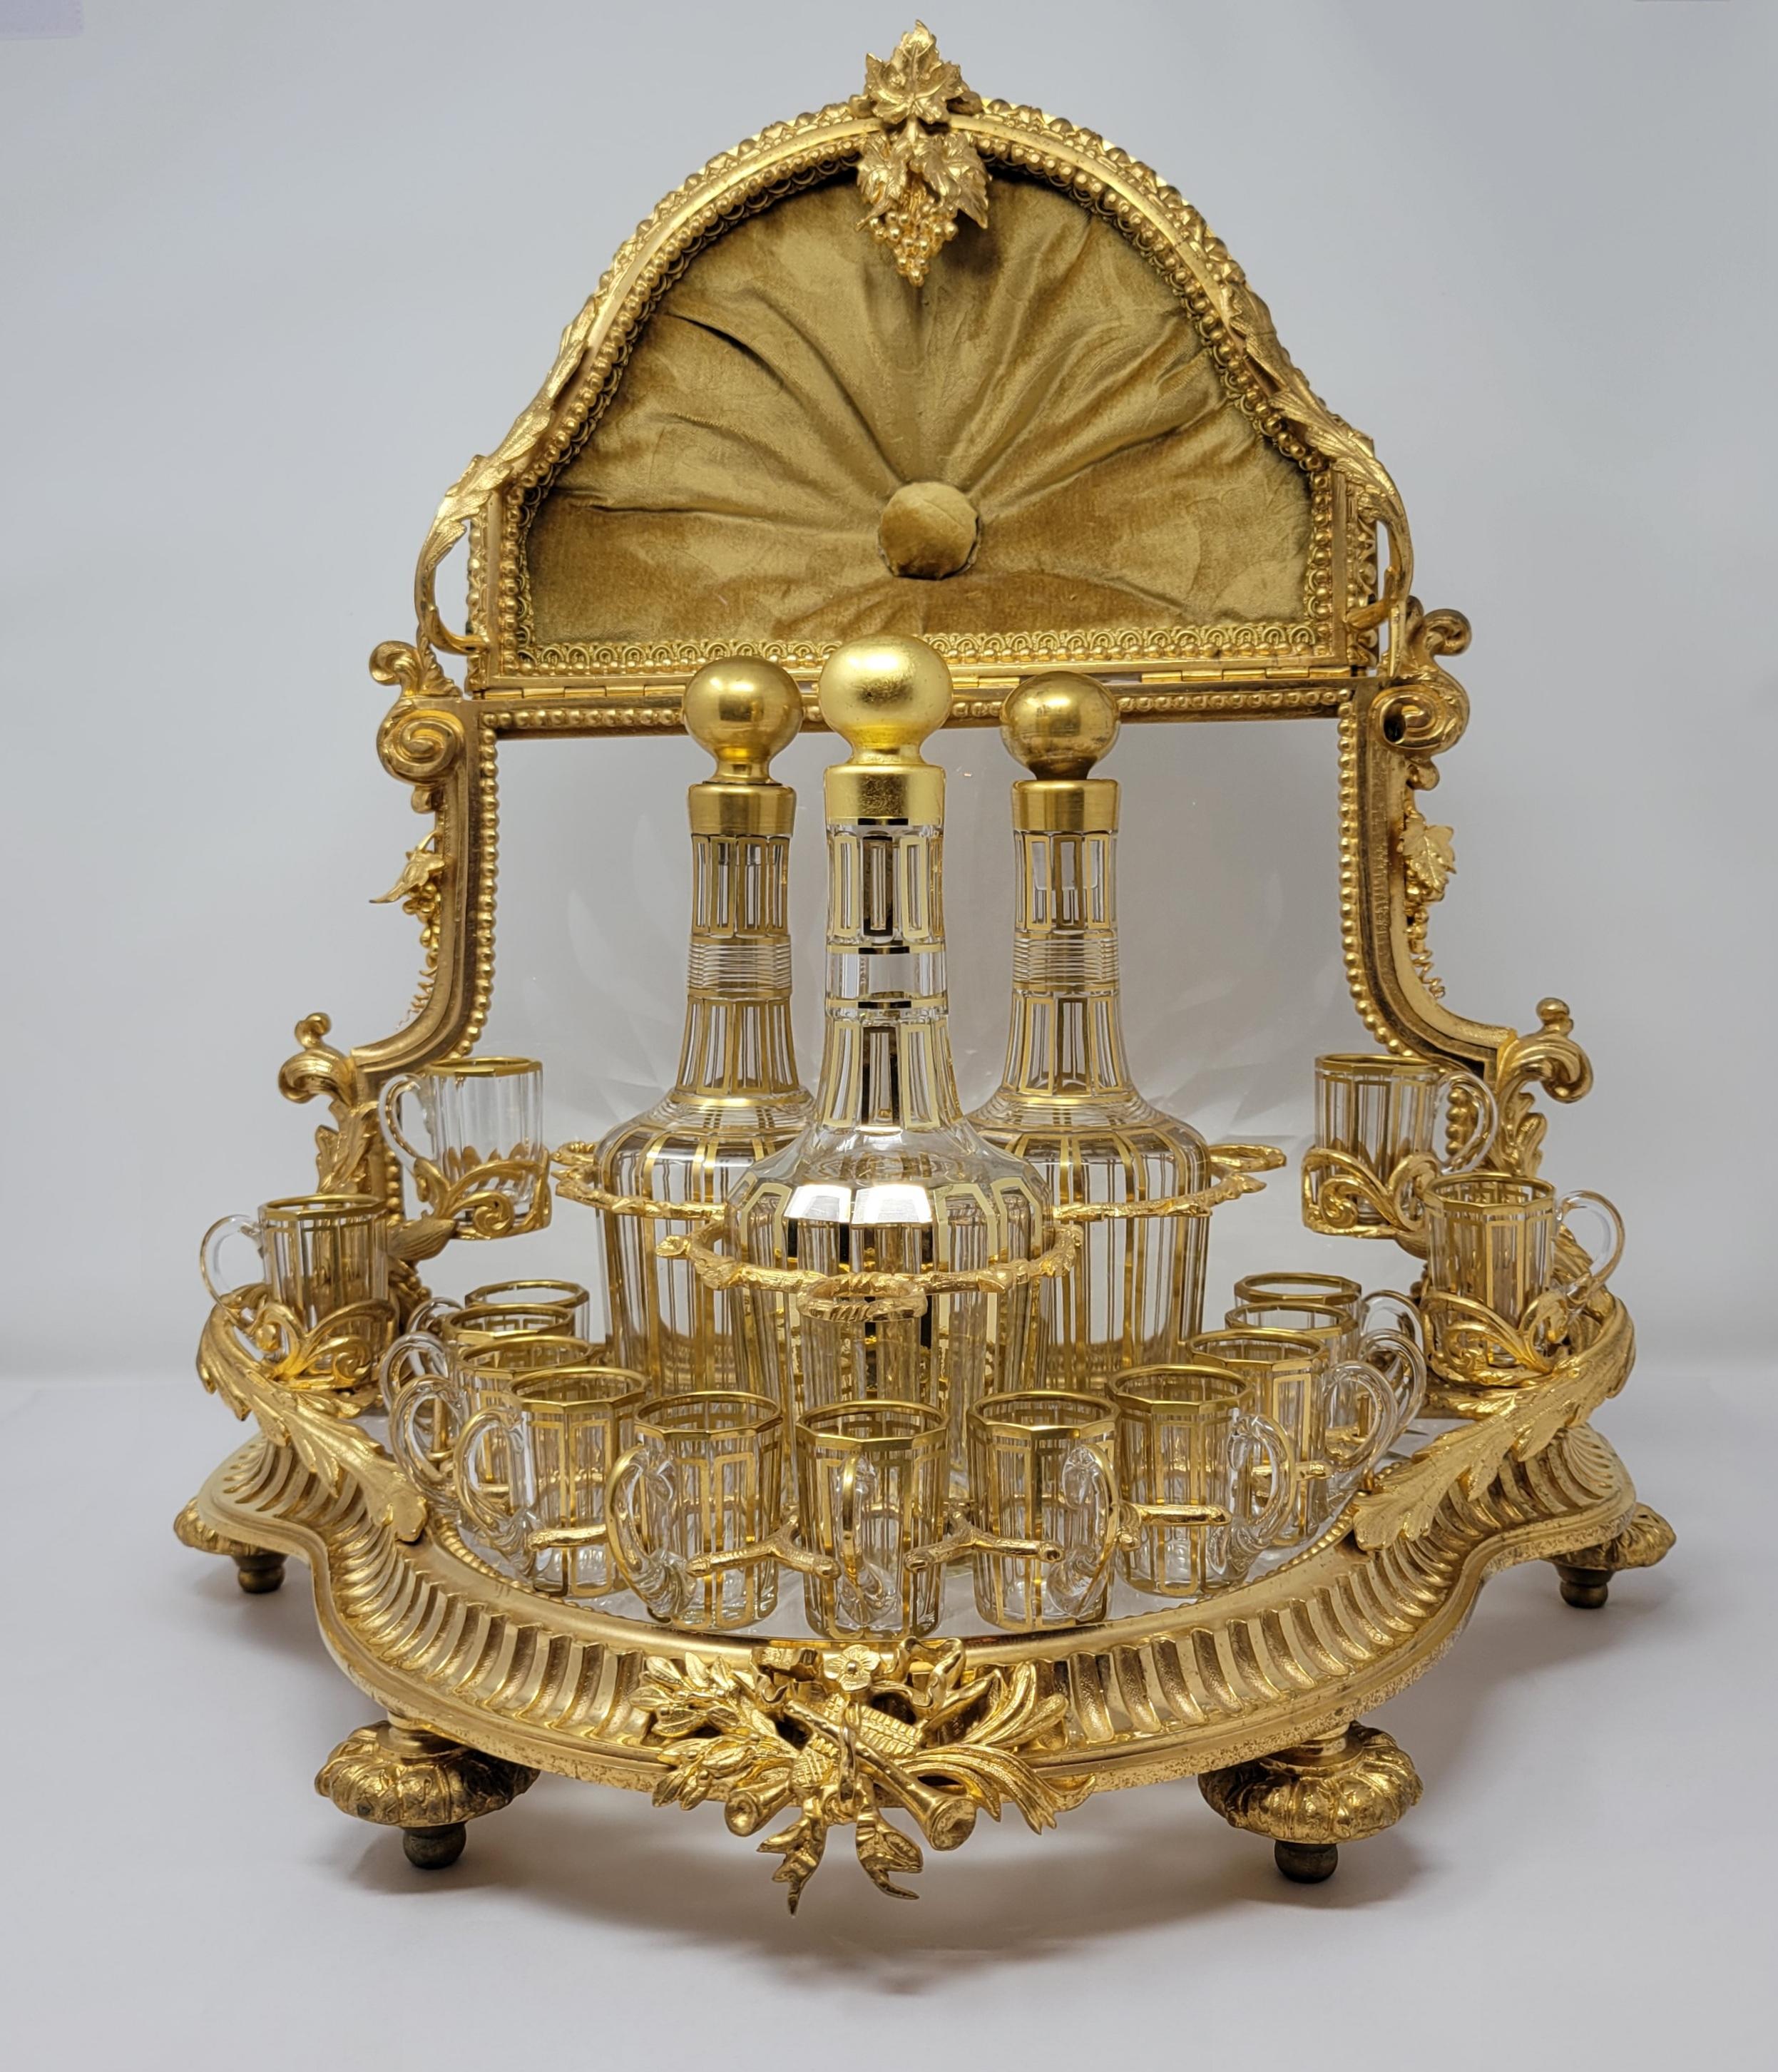 Museum Quality Antique 19th Century French Baccarat Crystal and Ormolu Cave à Liqueur with Fitted Interior that includes 3 Gold-Leaf Cut Crystal Liqueur Bottles and 15 Gold-Leaf Cut Crystal Liqueur Glasses.  Exceptional condition. The glass on the